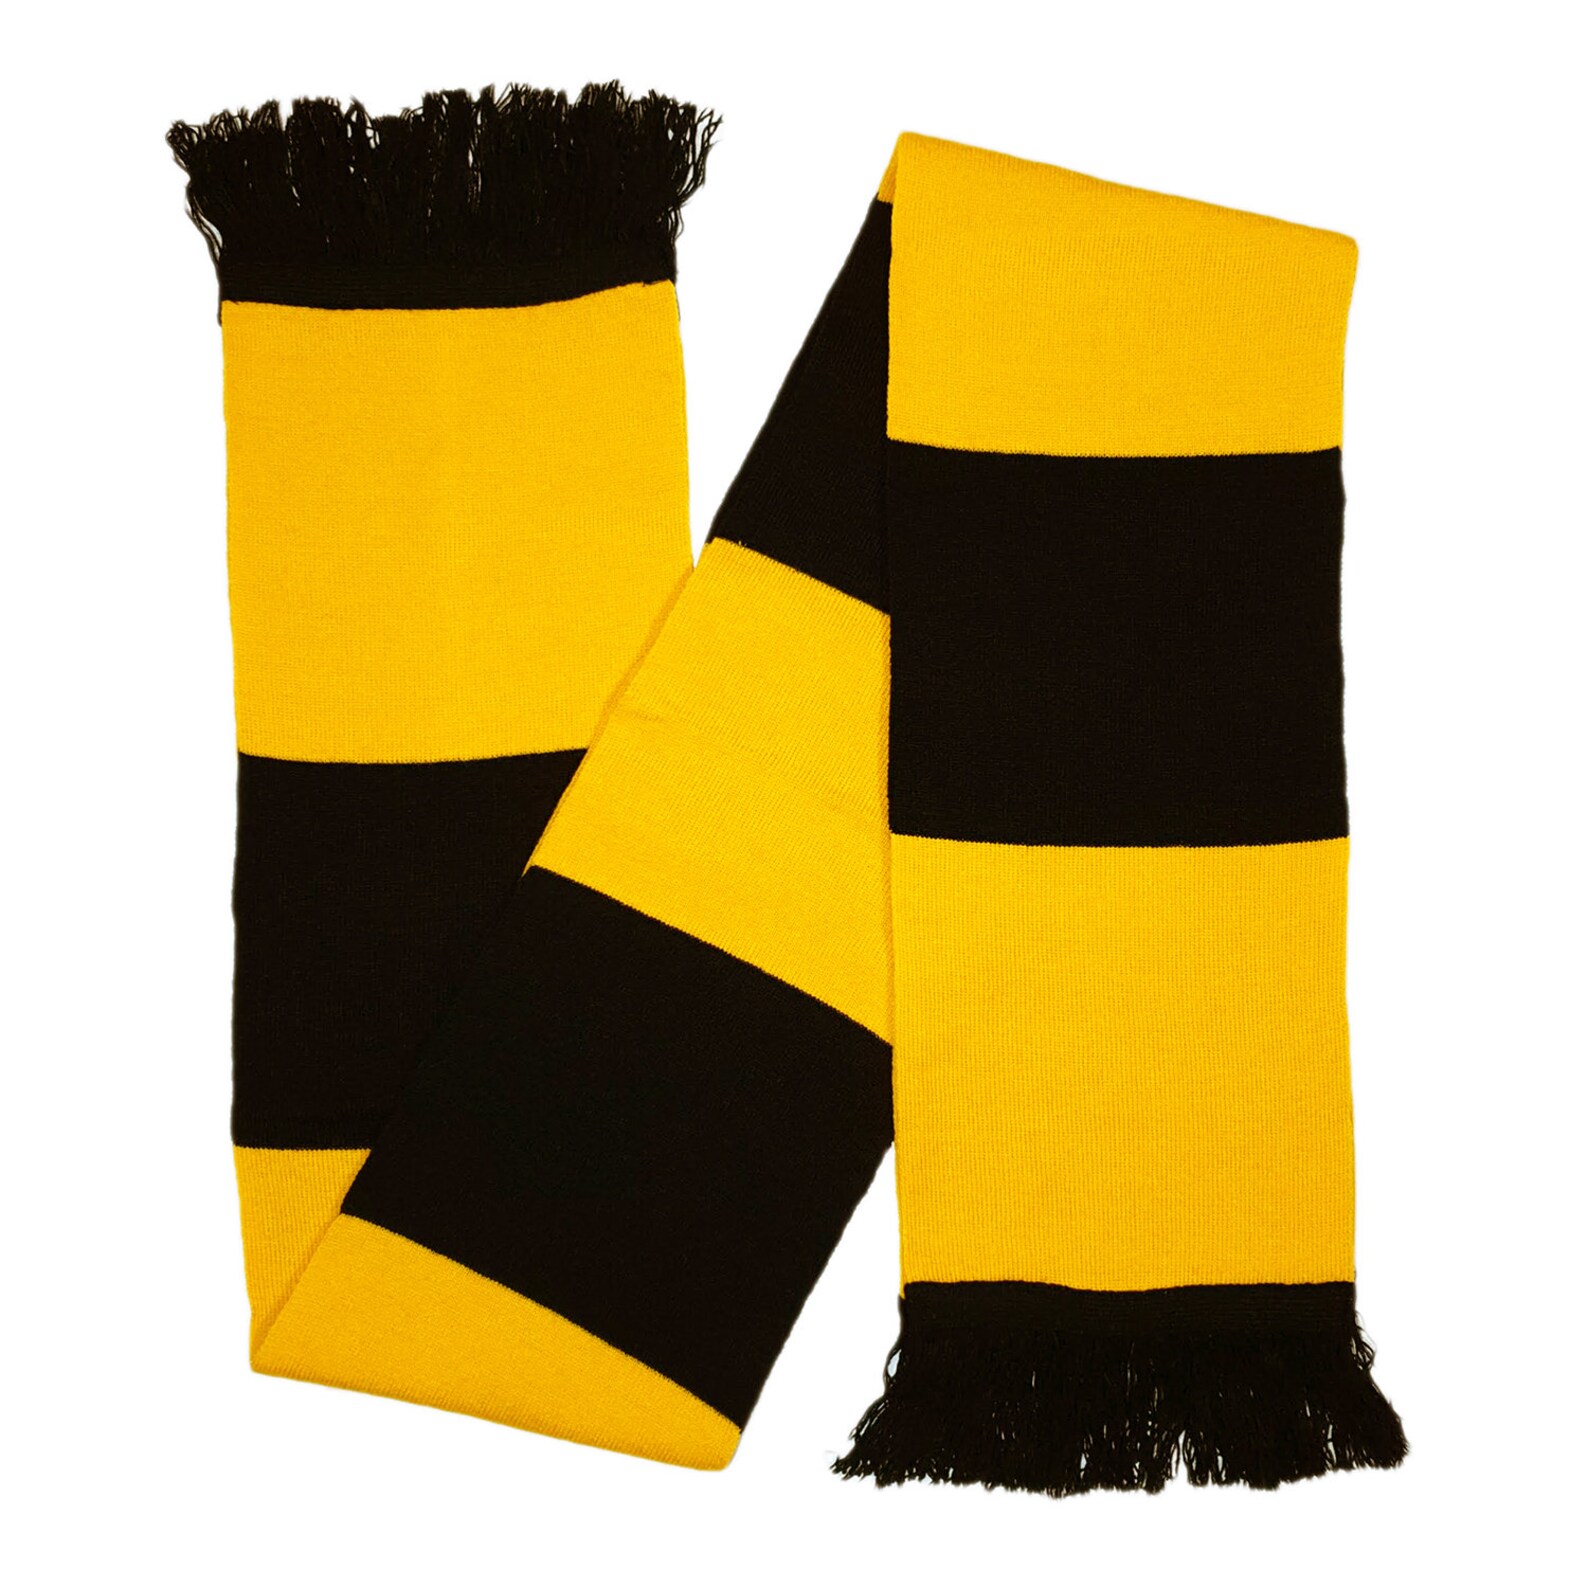 Black & Gold / Amber / Yellow Scarf Jacquard Knitted Classic - Etsy UK